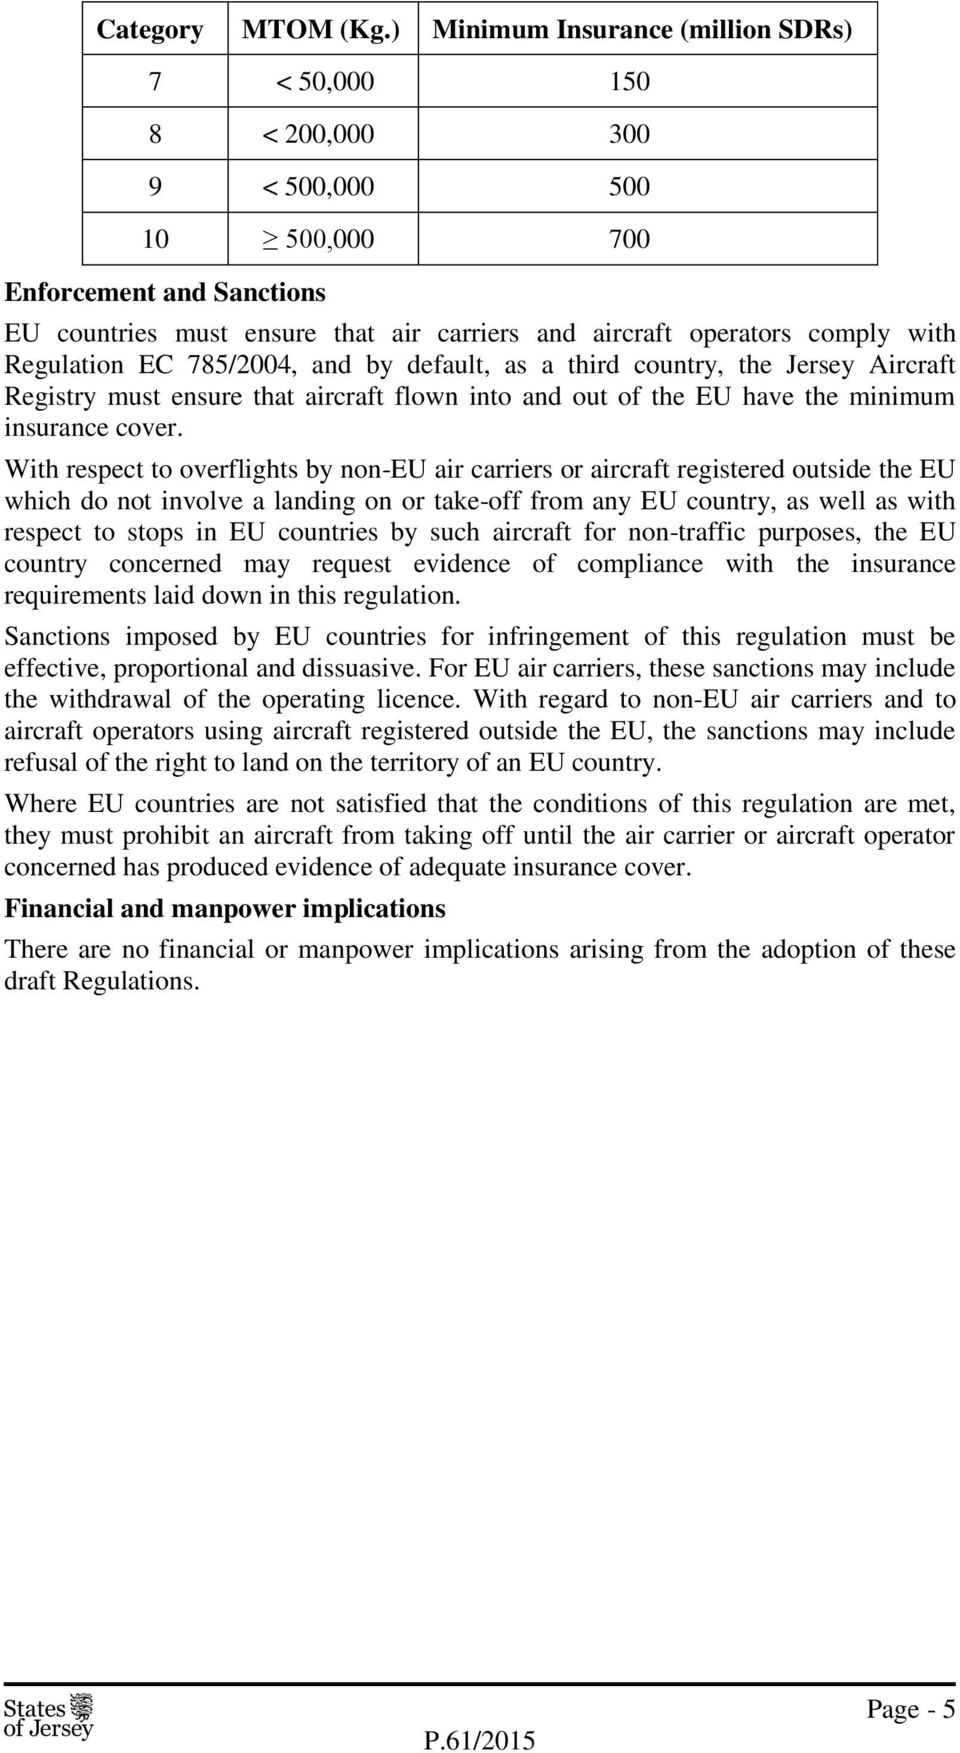 with Regulation EC 785/2004, and by default, as a third country, the Jersey Aircraft Registry must ensure that aircraft flown into and out of the EU have the minimum insurance cover.